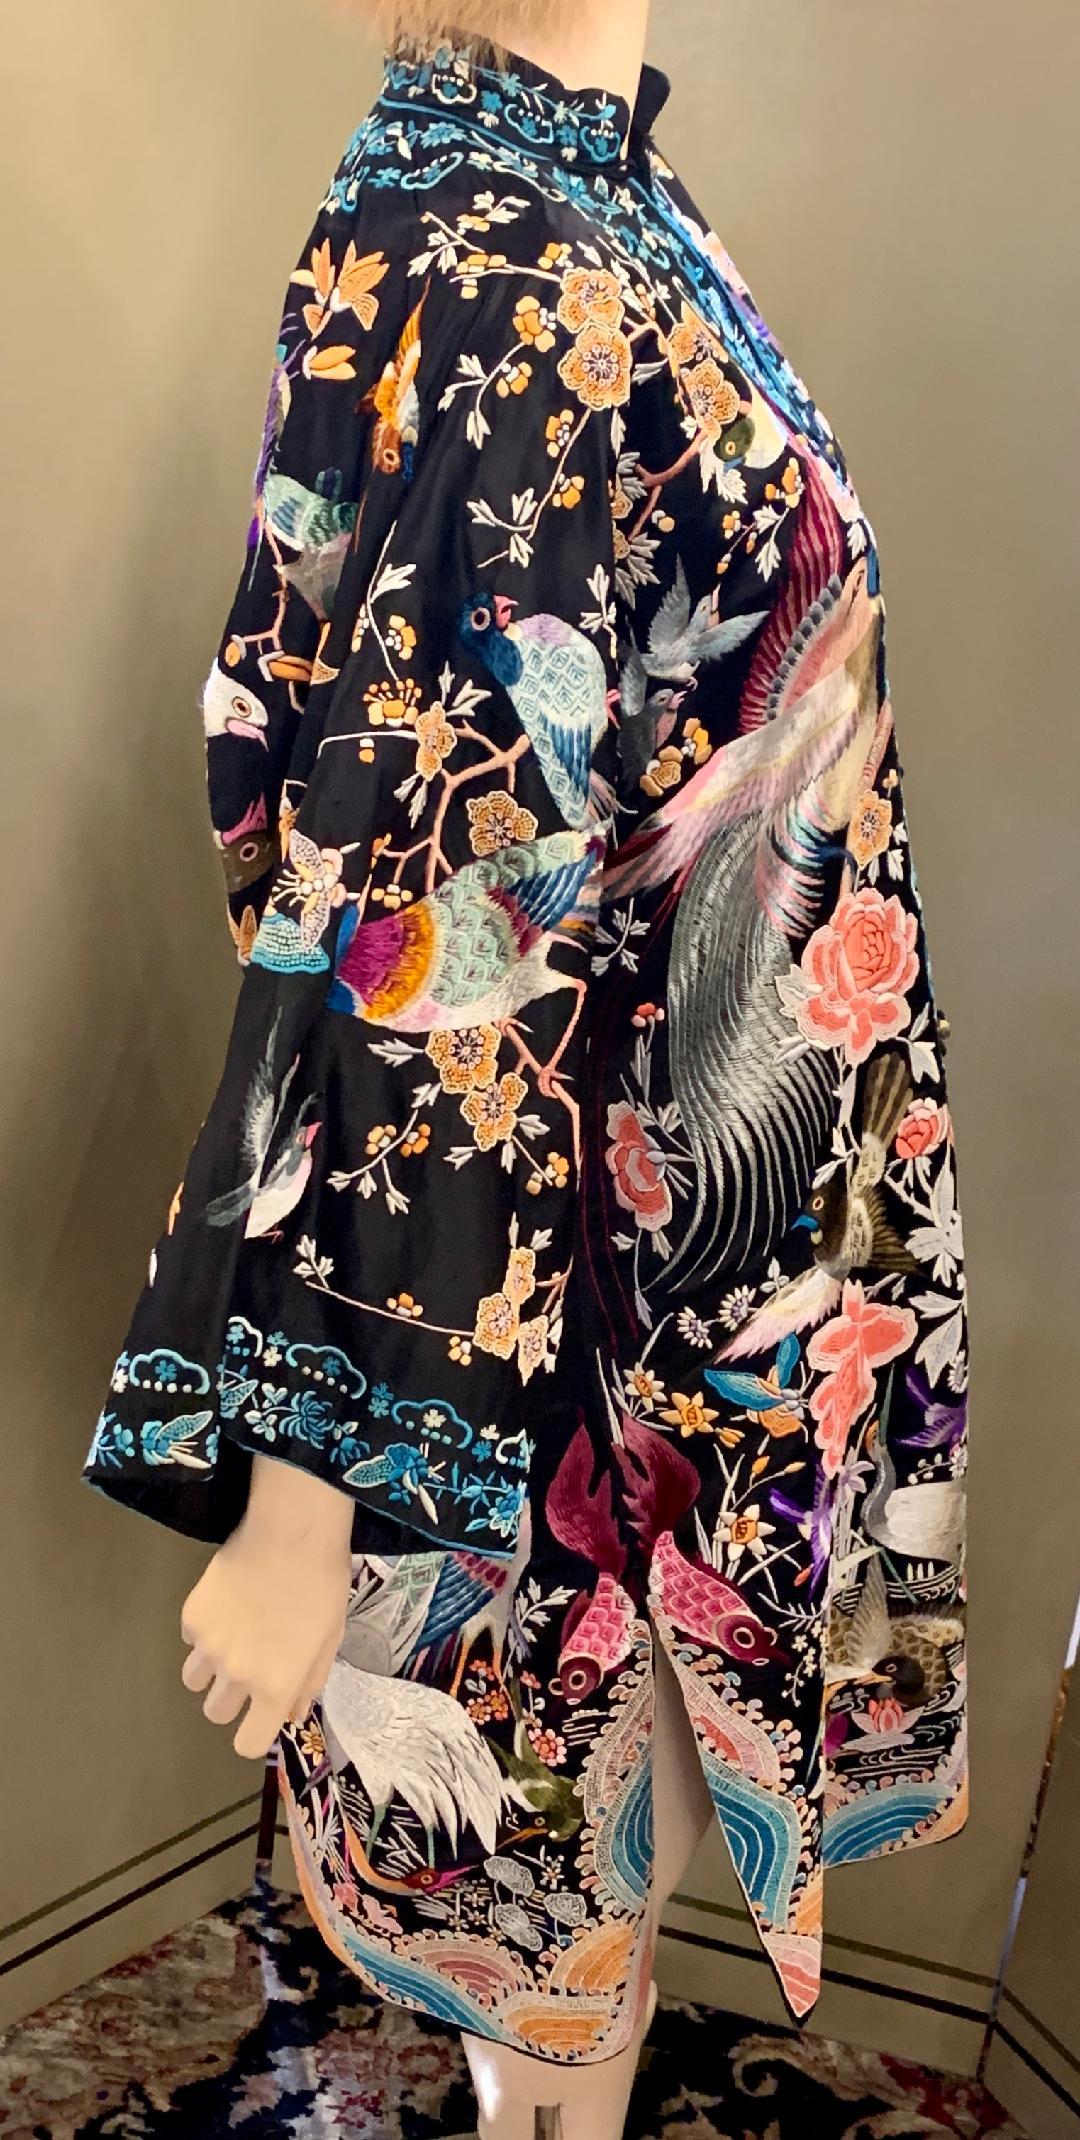 Incredible vibrant handmade black silk Chinese Peacock evening coat or dress is a work of art, lavishly hand embroidered with a highly stylized array of astonishingly beautiful and boldly vivid birds, butterflies, flowers and rainbows. The back of